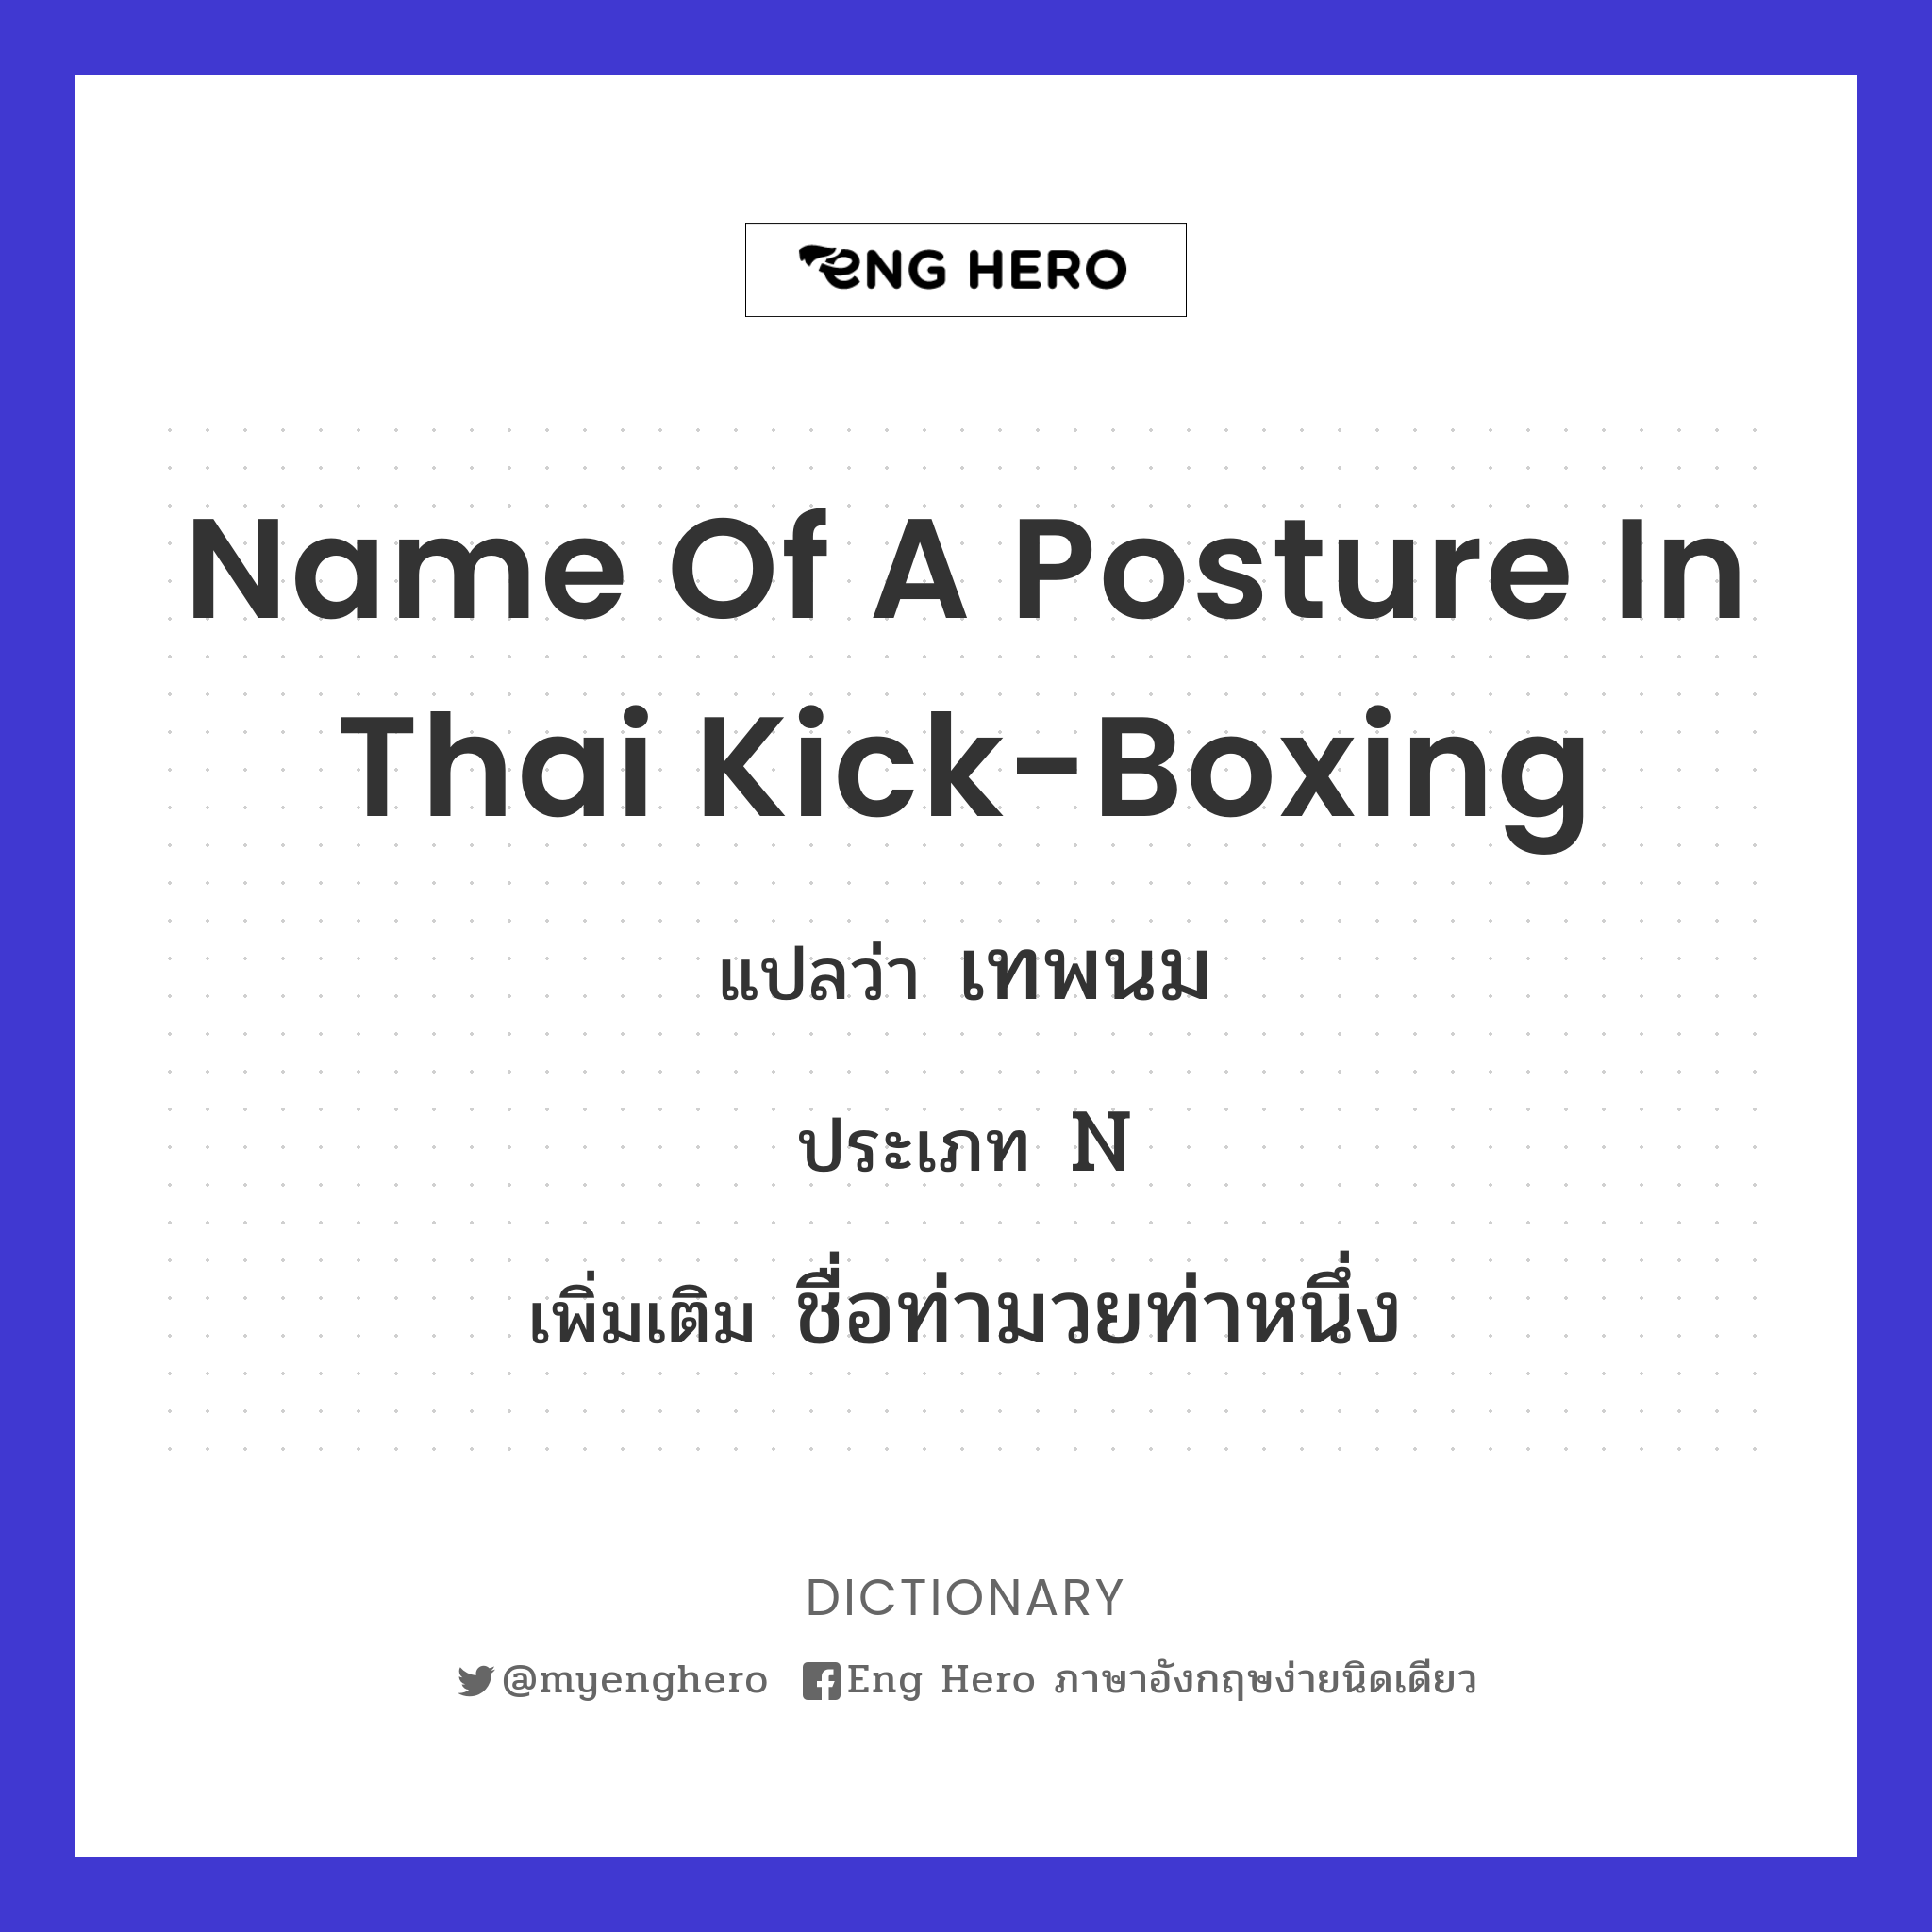 name of a posture in Thai kick-boxing